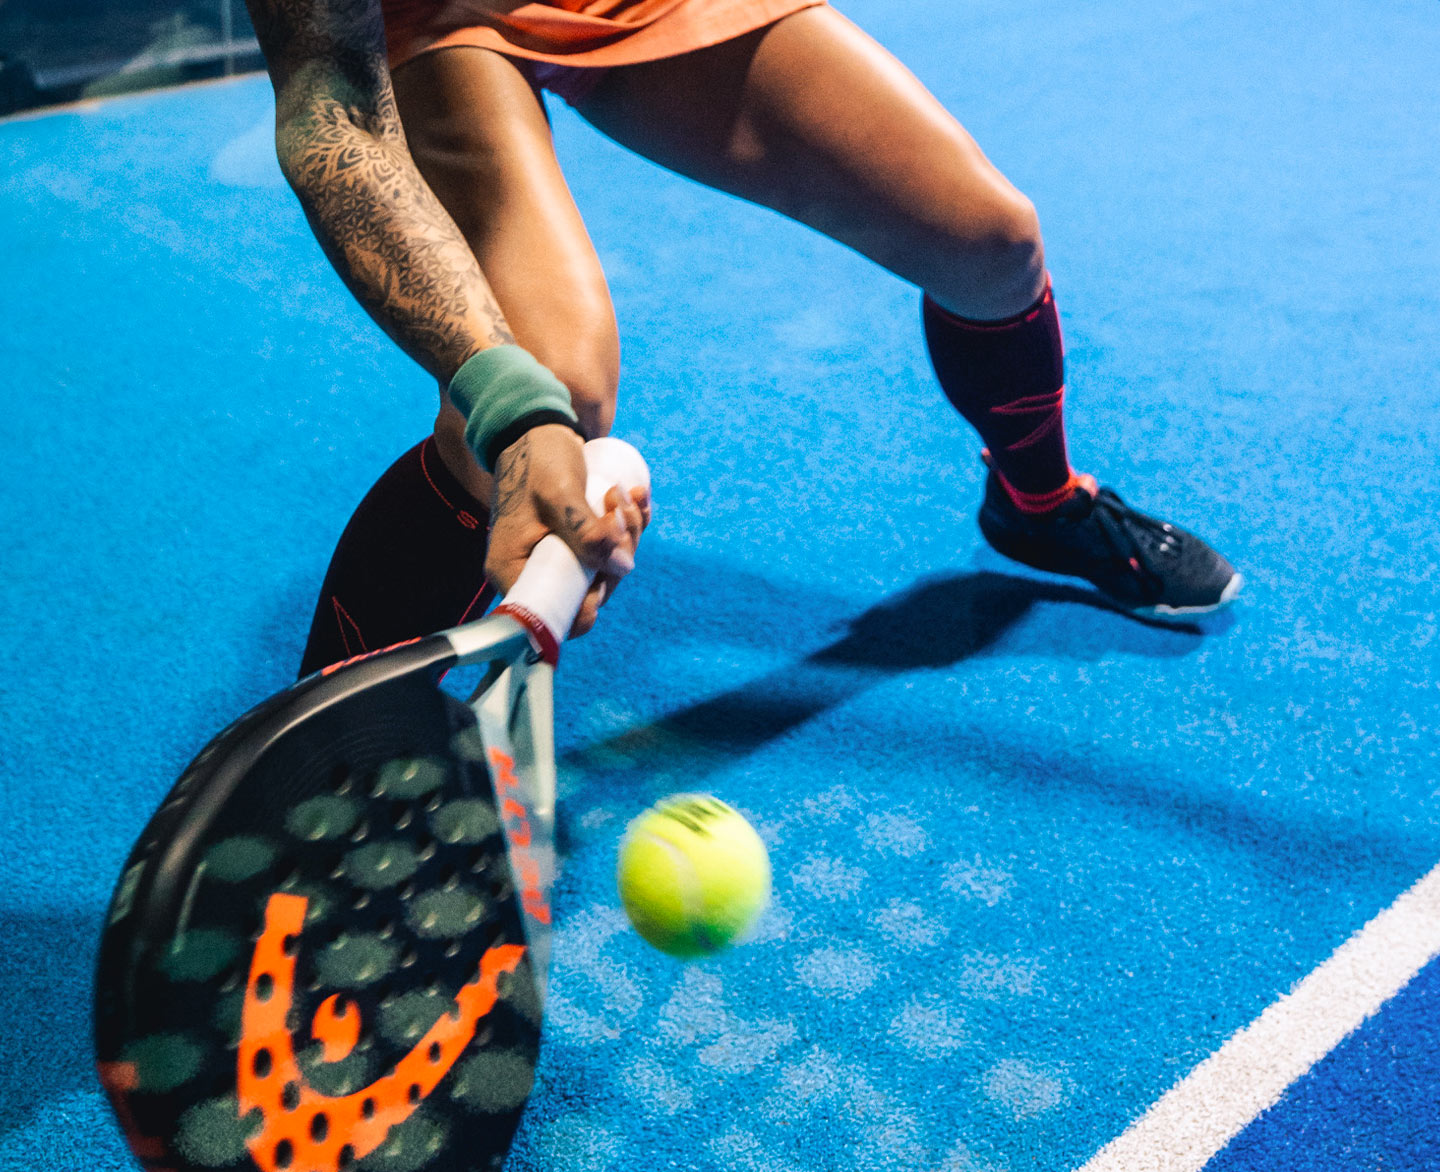 Woman hitting a ball with her black and orange padel racket.